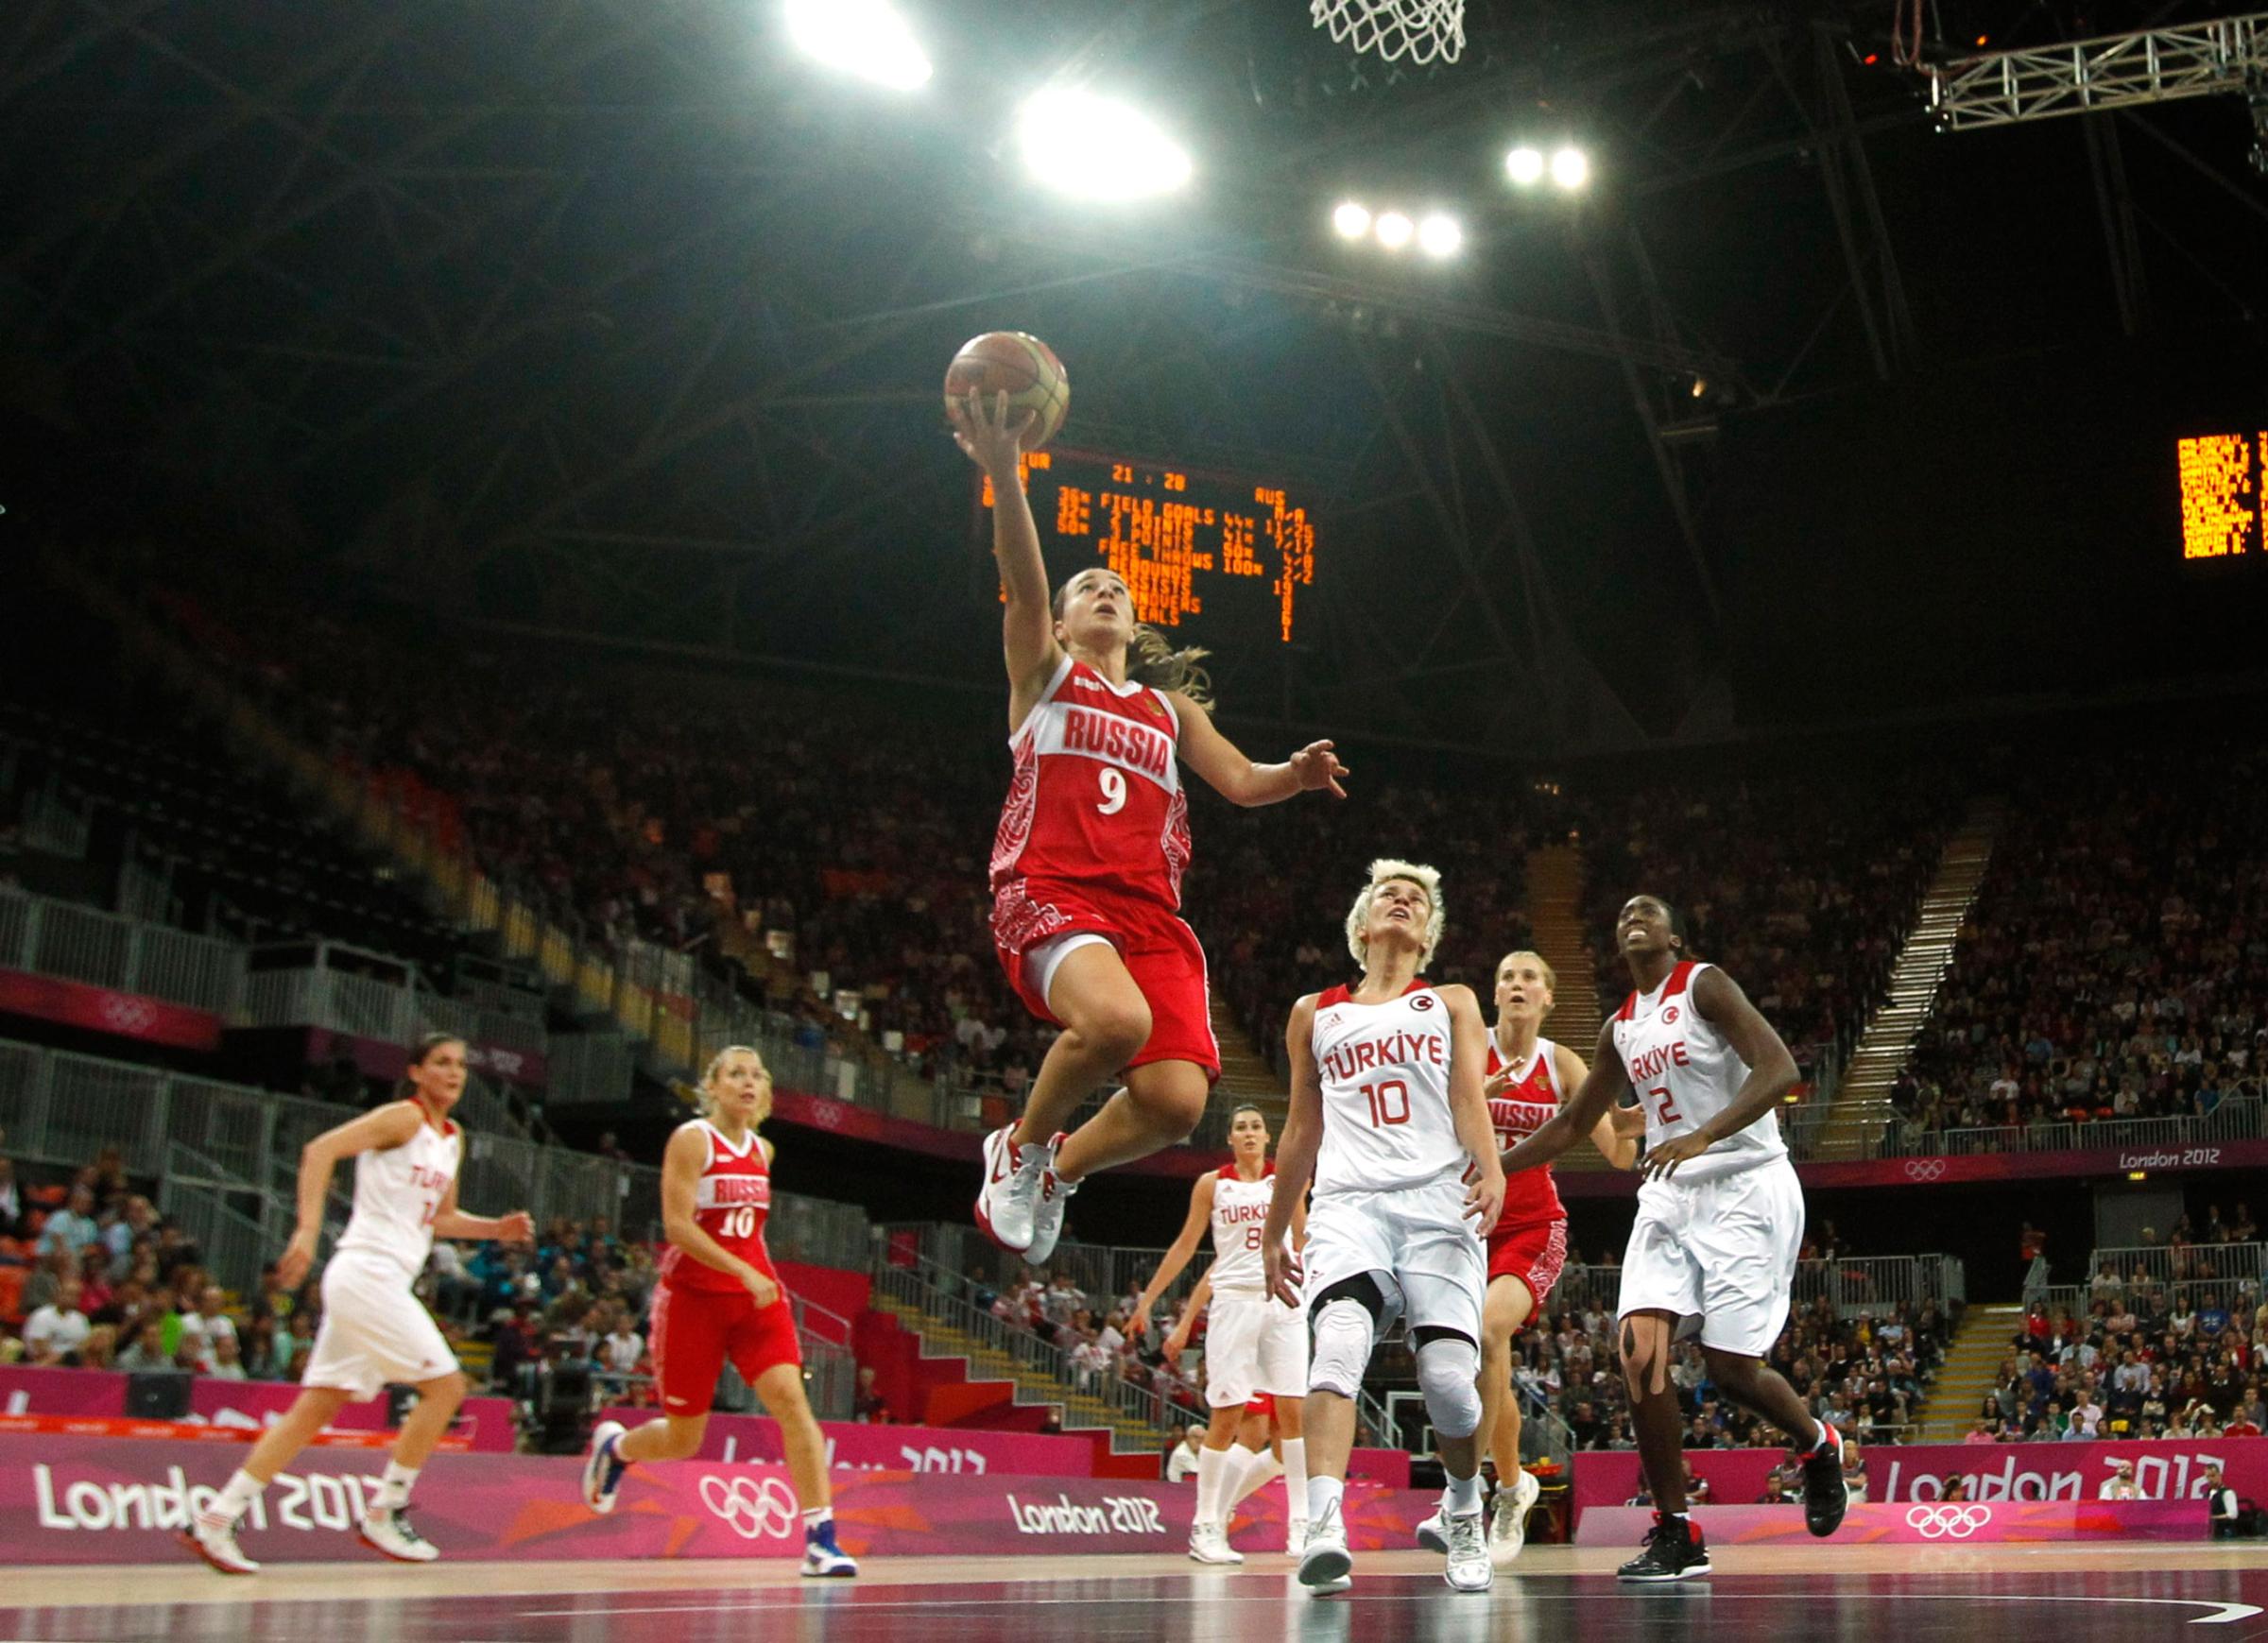 Hammon scoring for the Russian national team during the 2012 Olympic Games in London.